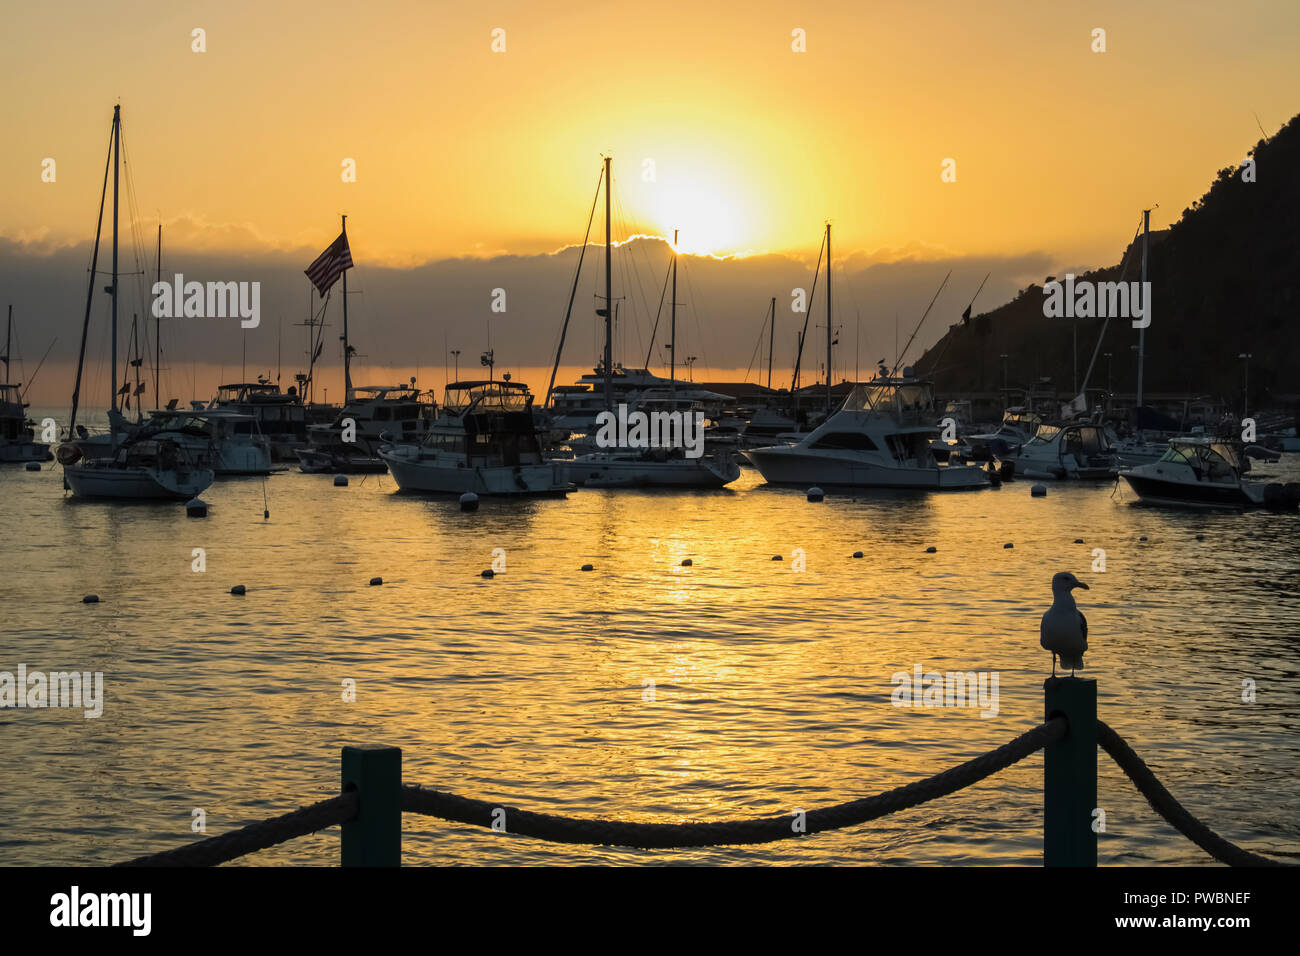 Sunrise over ocean harbor full of boats with American flag and seagull on post in foreground Stock Photo